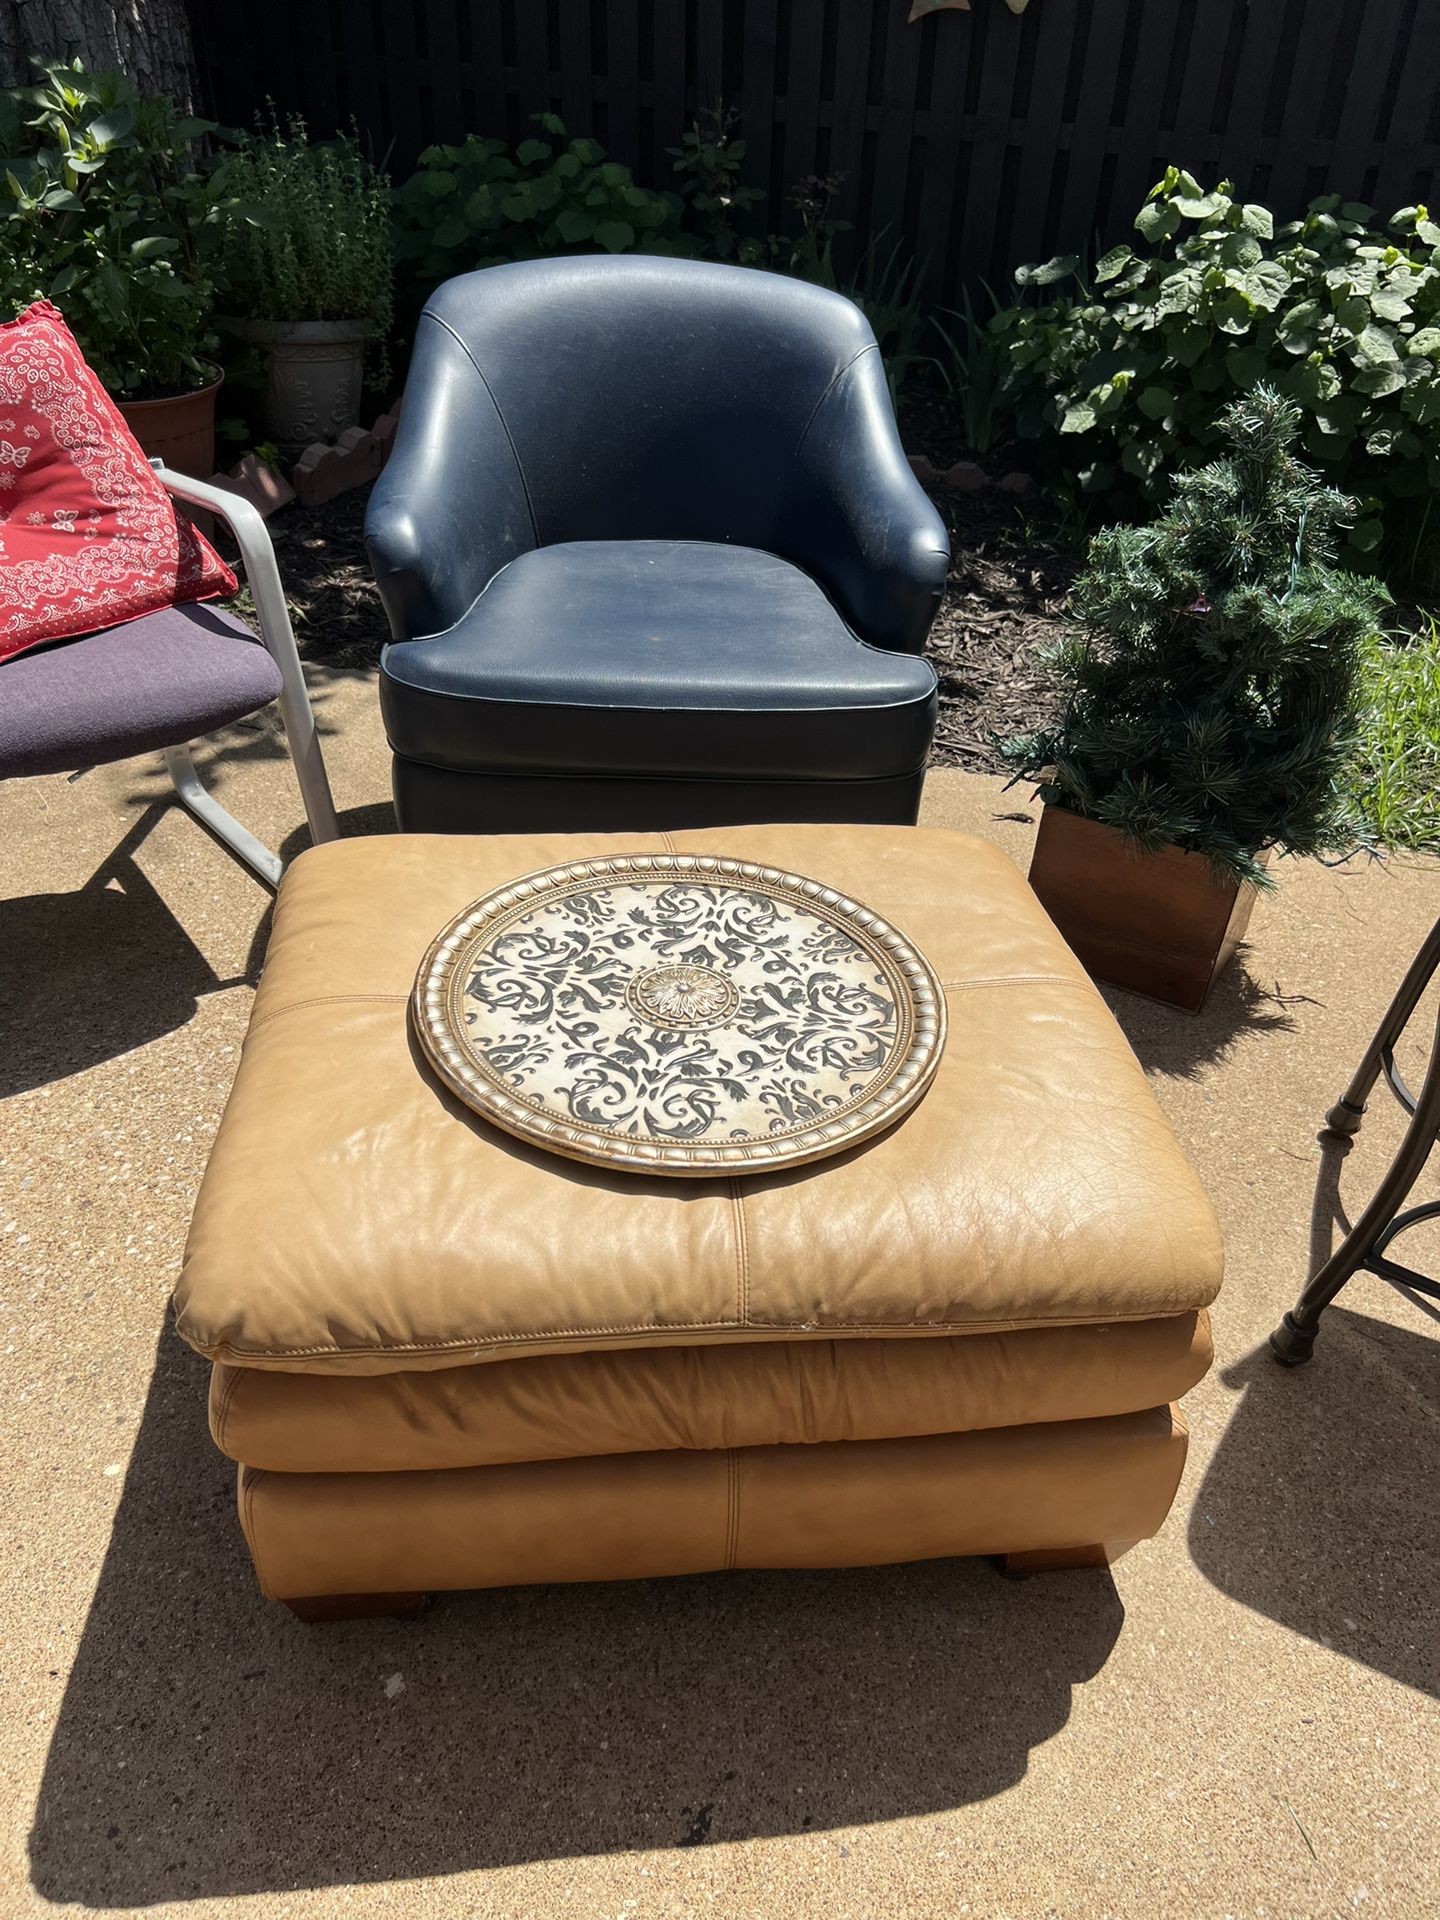 Leather ottoman and a caramel tan color great condition smoke-free home no cut